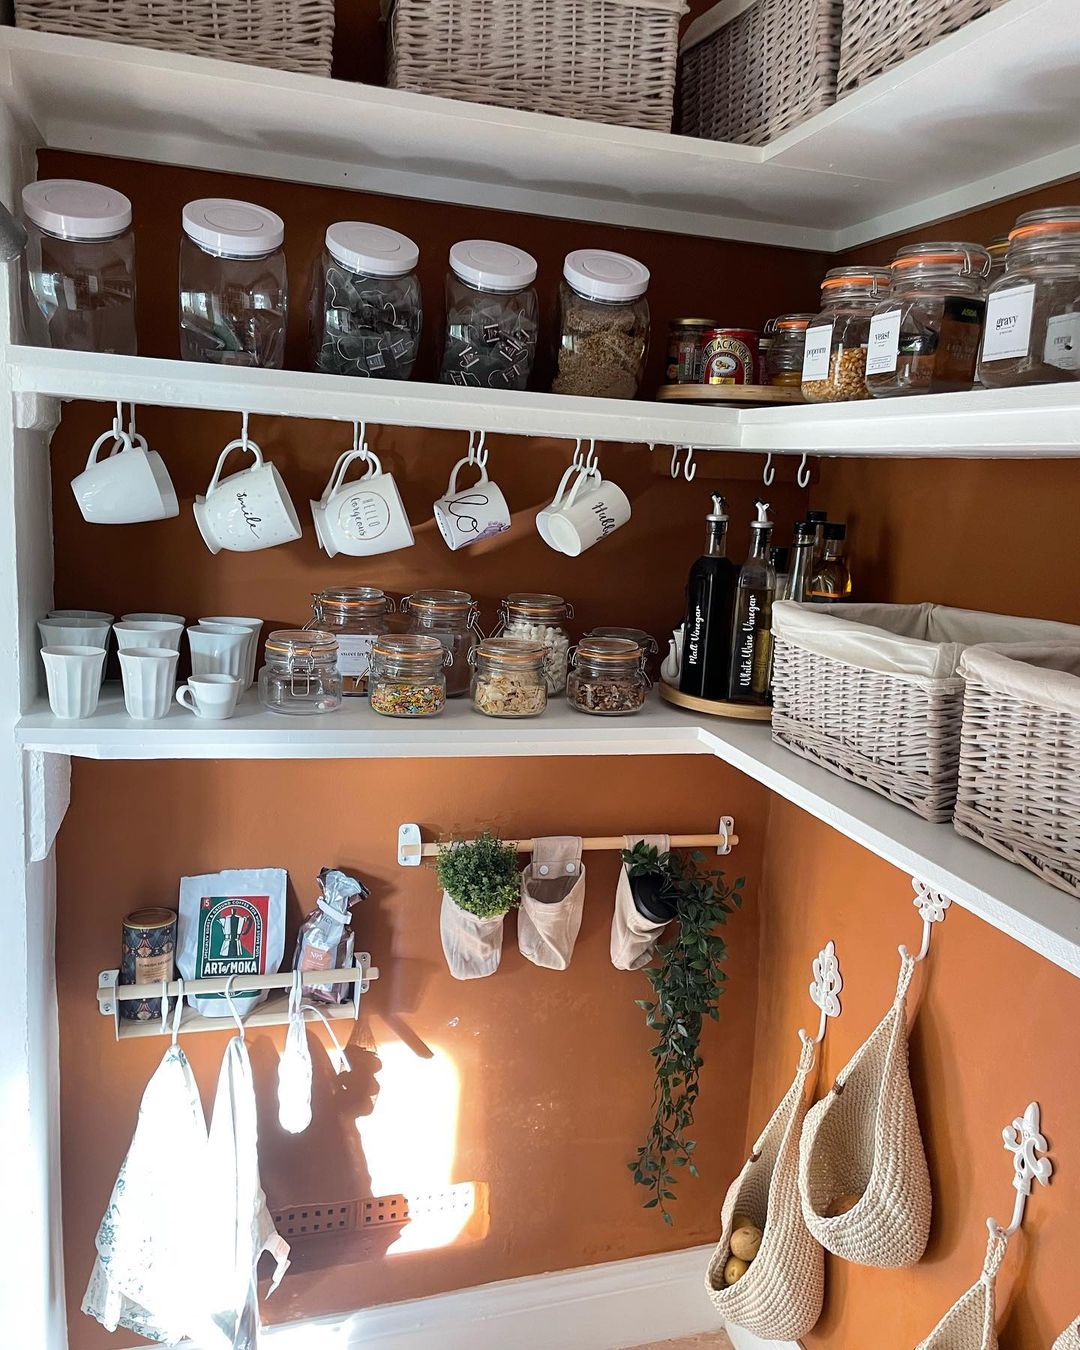 A kitchen with shelves filled mainly with pots.